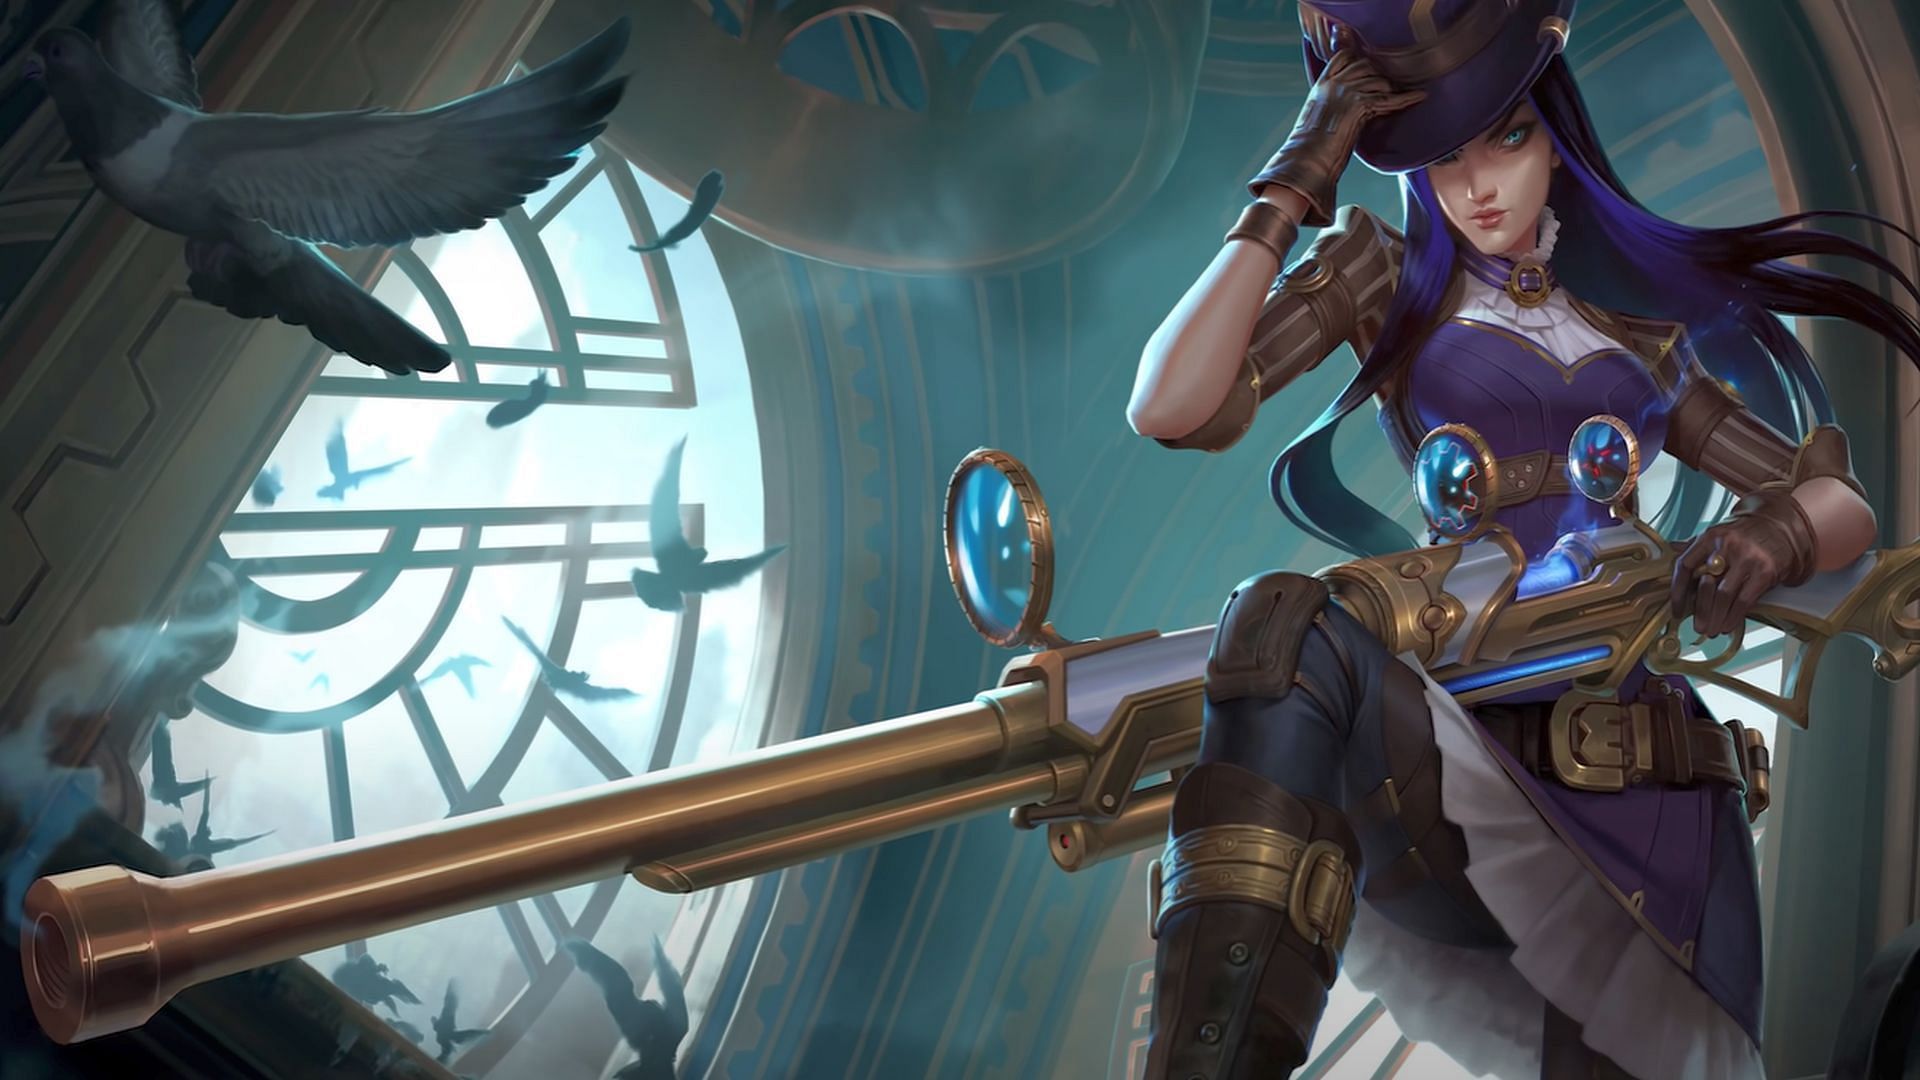 Arcane: Every League of Legends playable character on the show